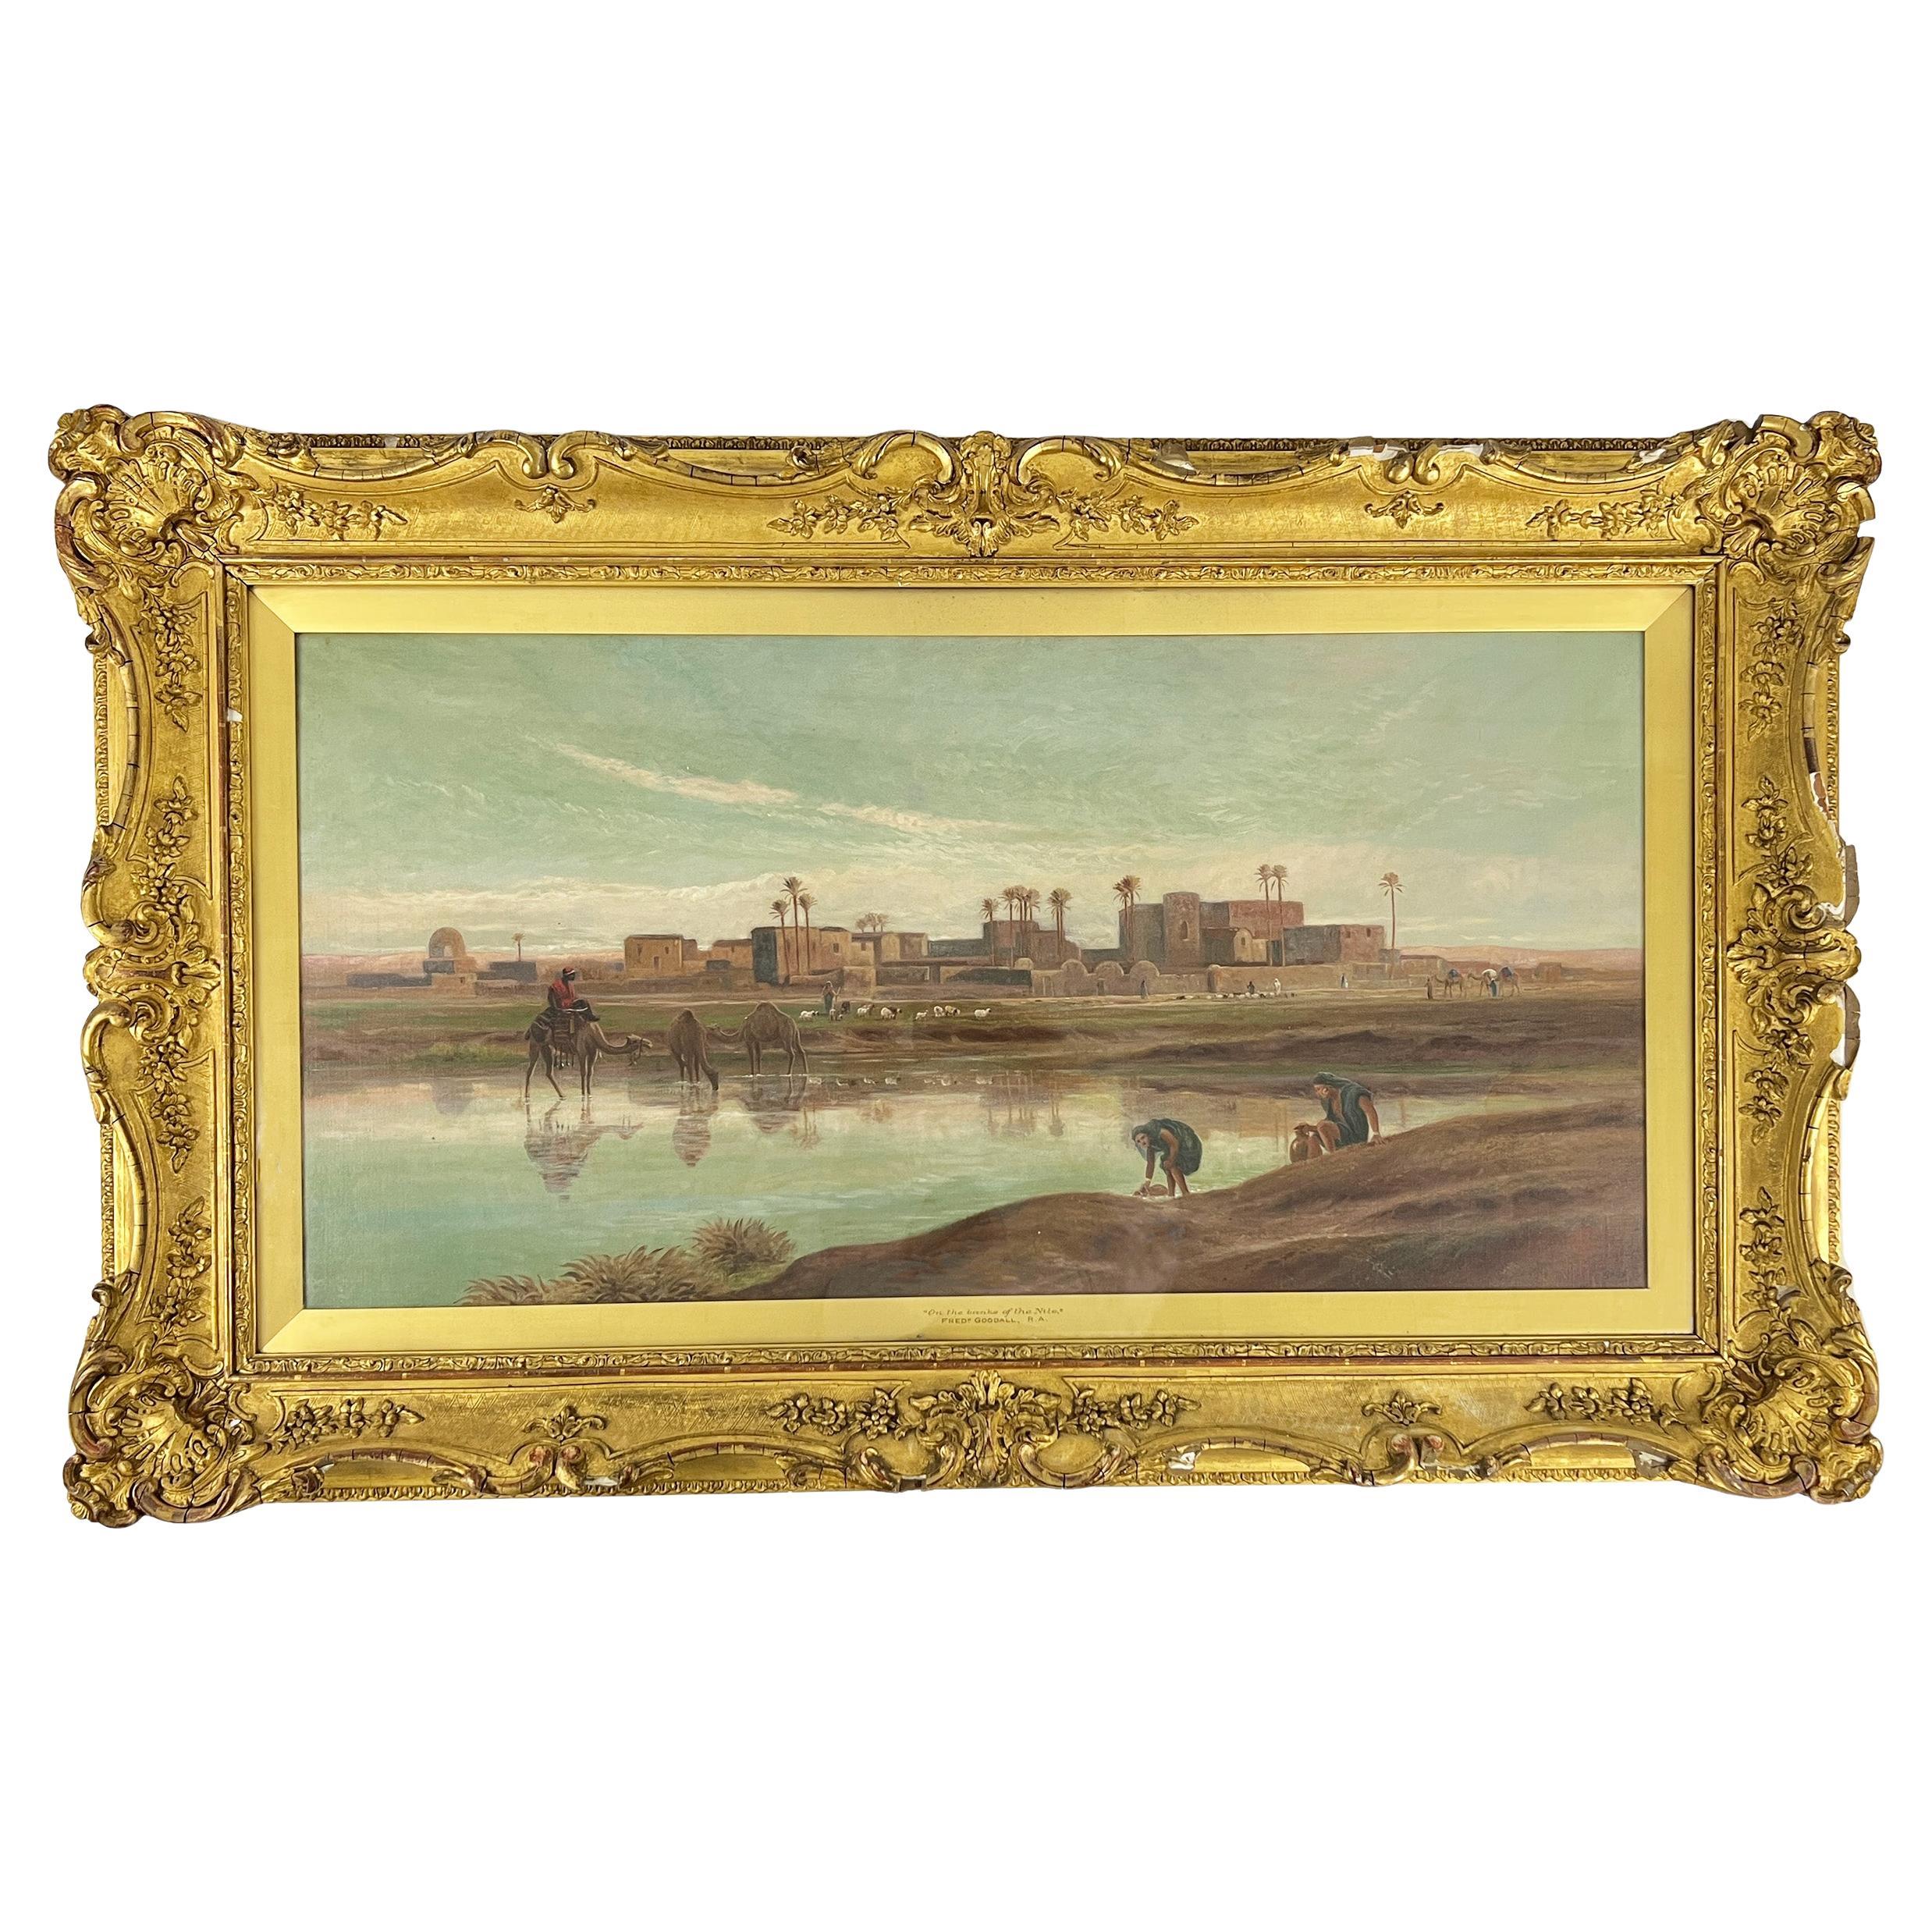 « On the Banks of the Nile », grande huile sur toile de Frederick Goodall R.A